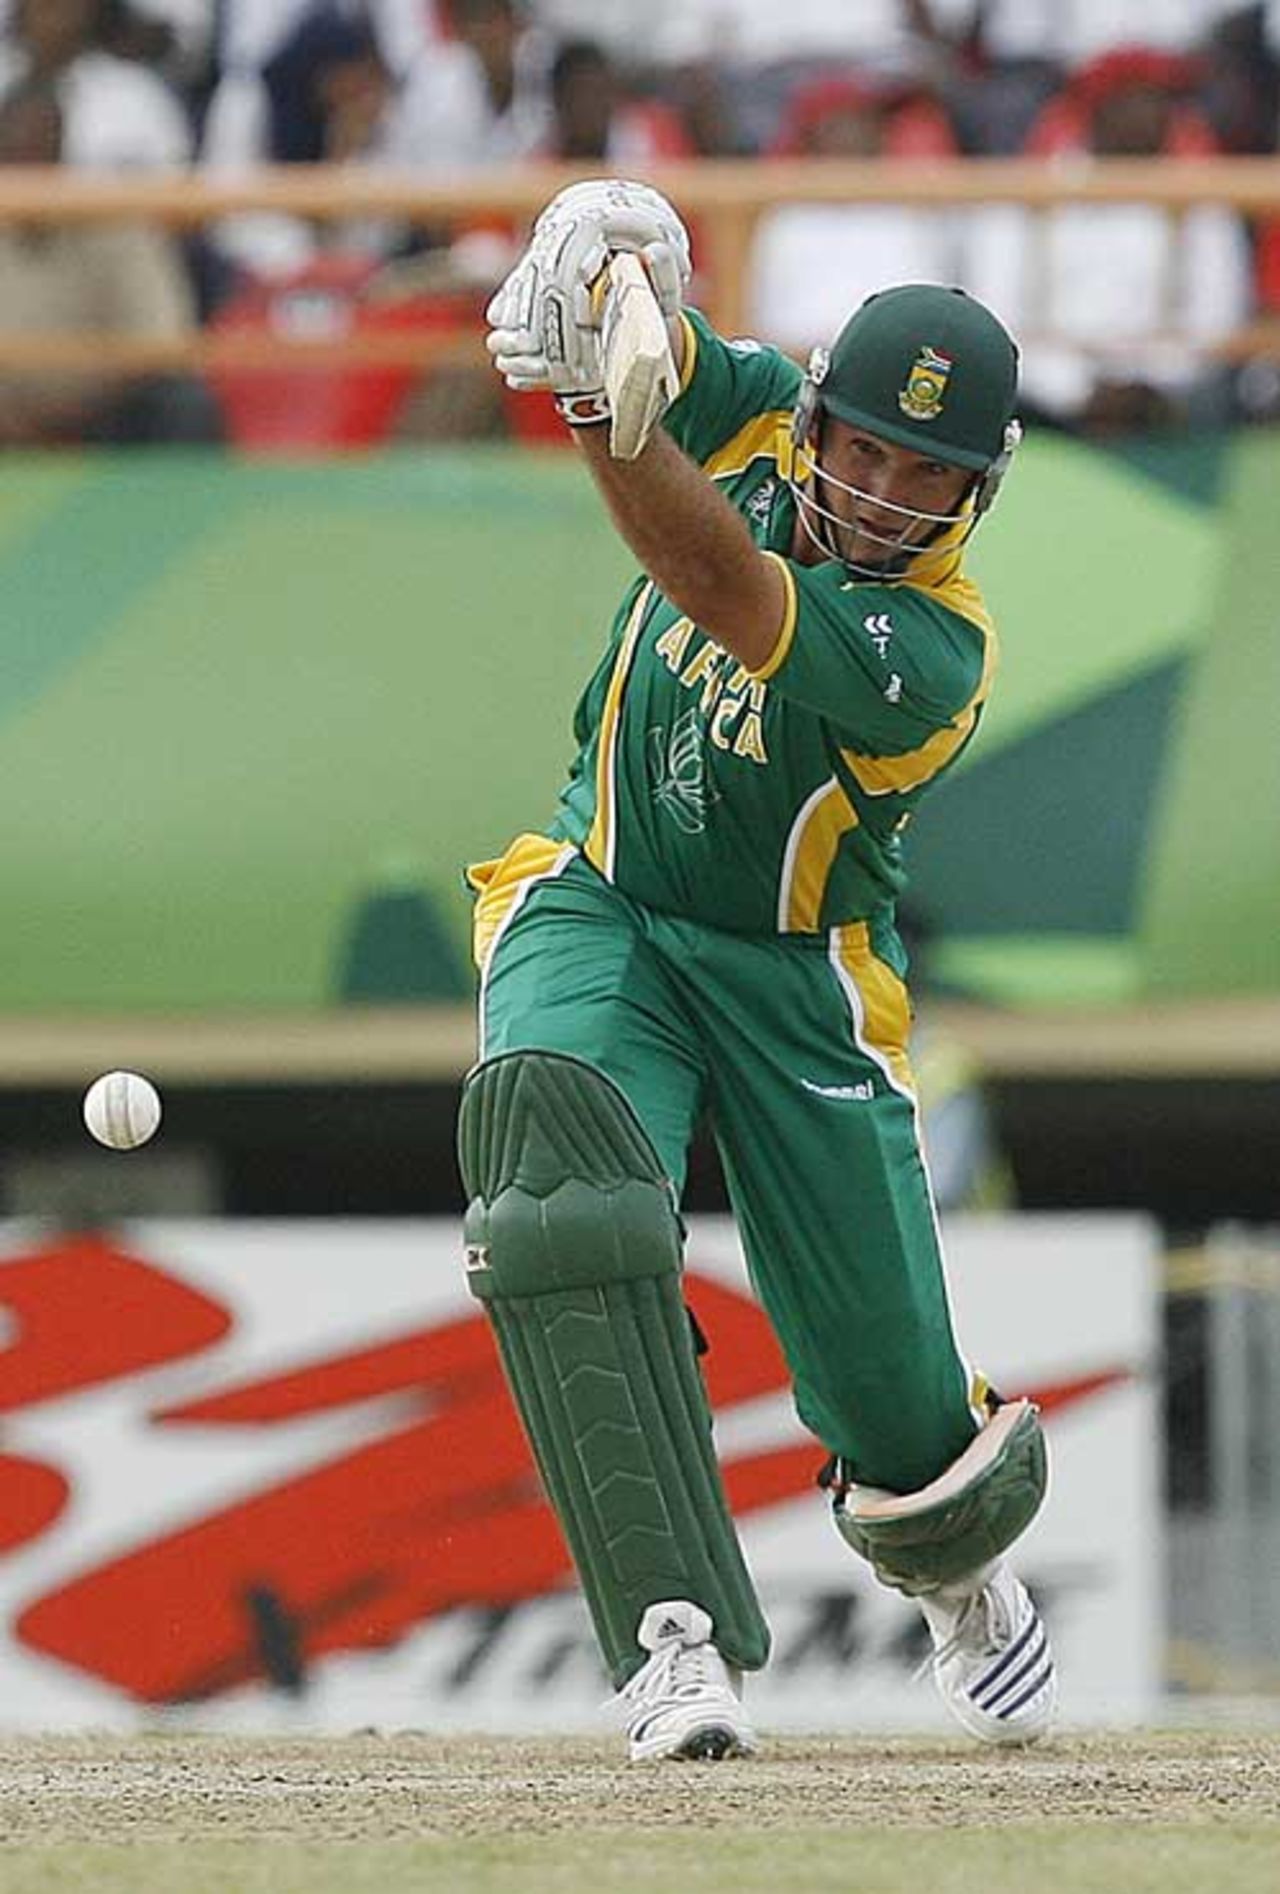 Graeme Smith drives as he sets the pace in South Africa's chase, Ireland v South Africa, Guyana, April 3, 2007